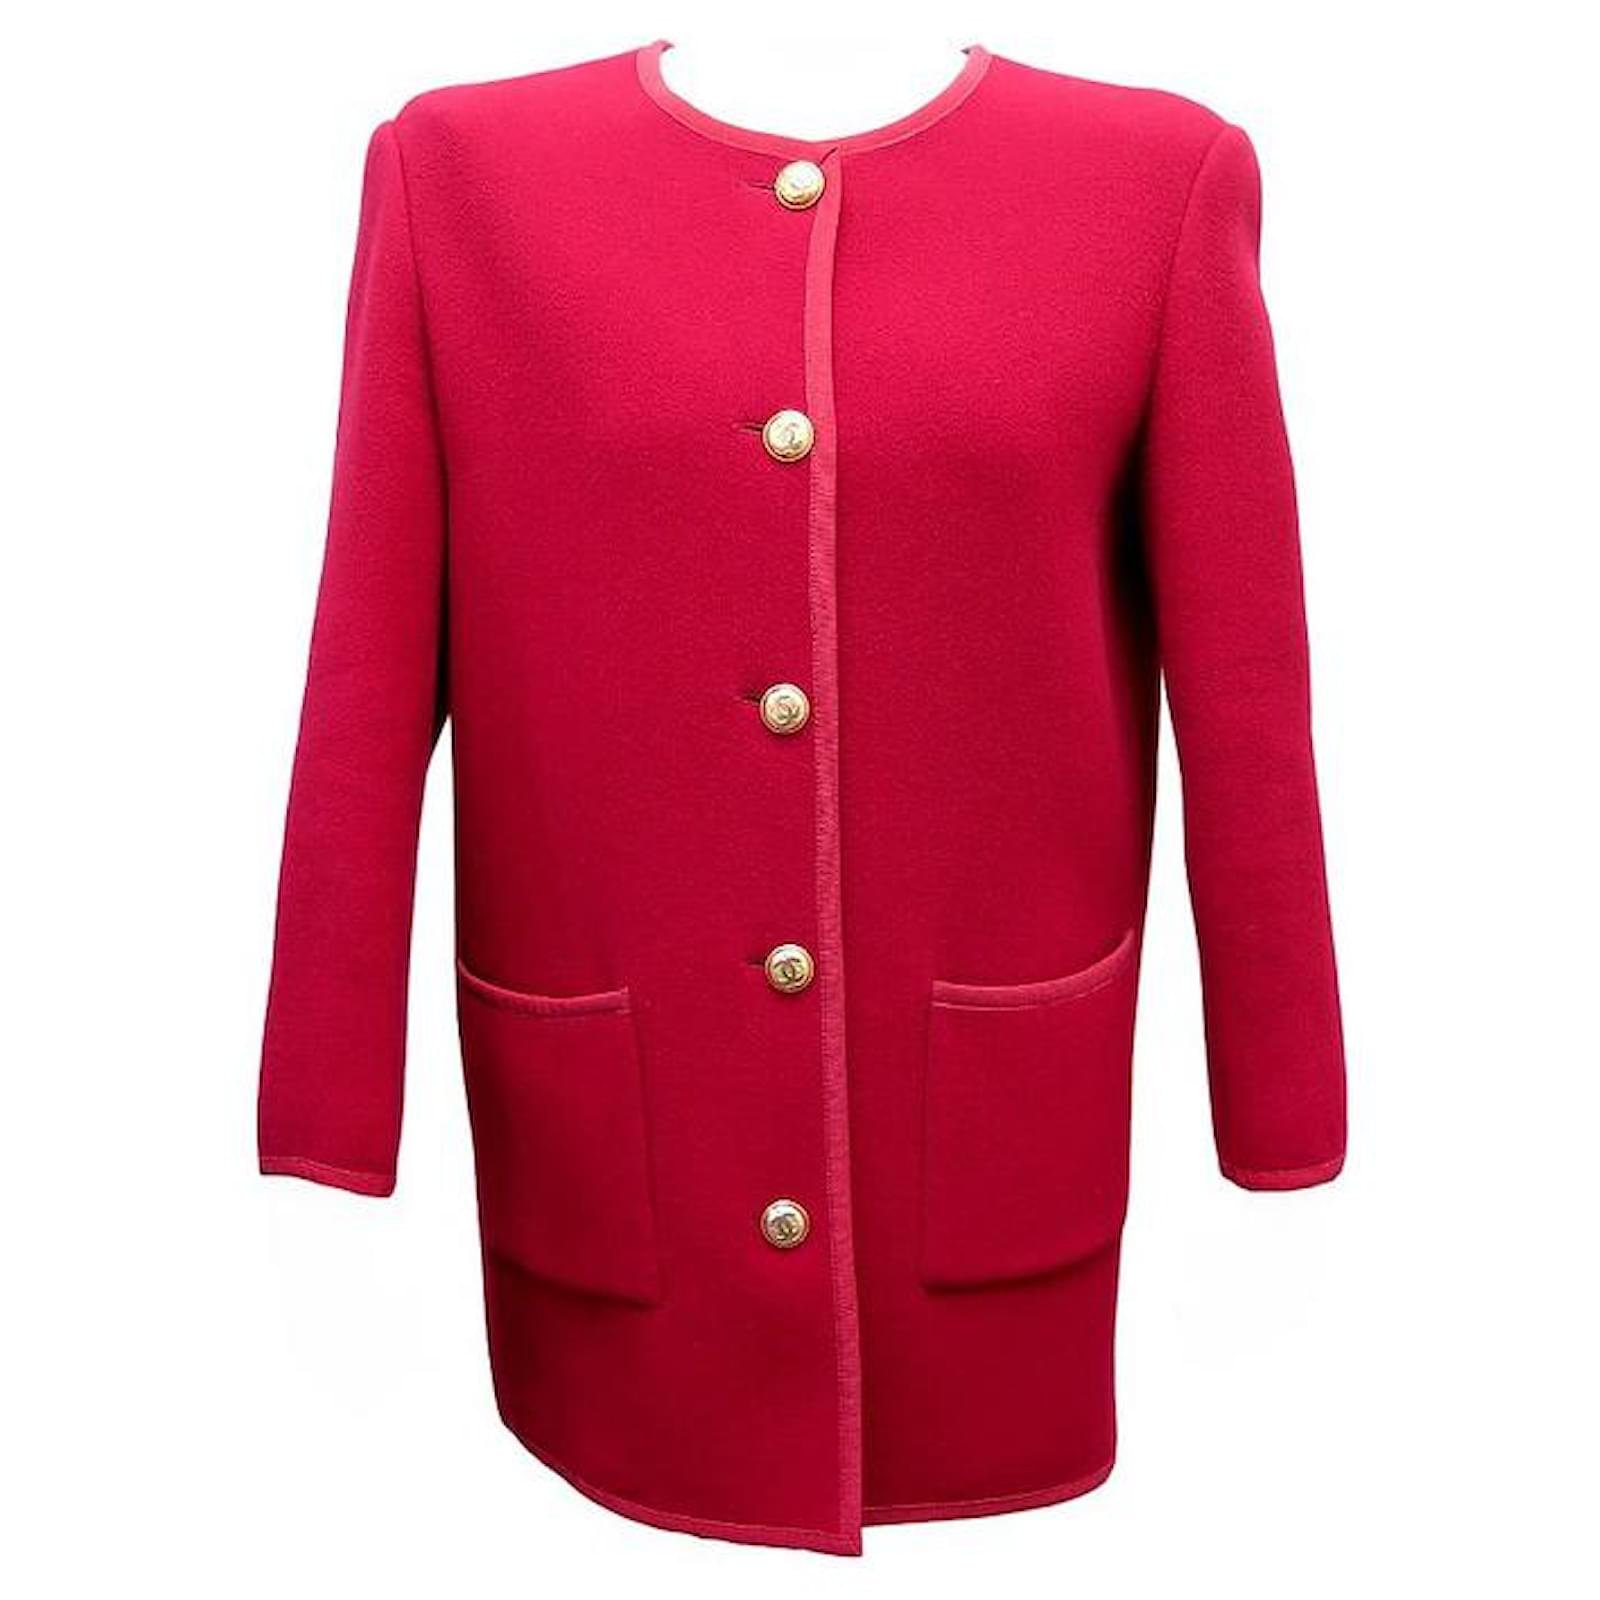 Jackets Chanel Vintage Long Chanel Jacket with CC Logo Buttons L 42 Red Cashmere Jacket